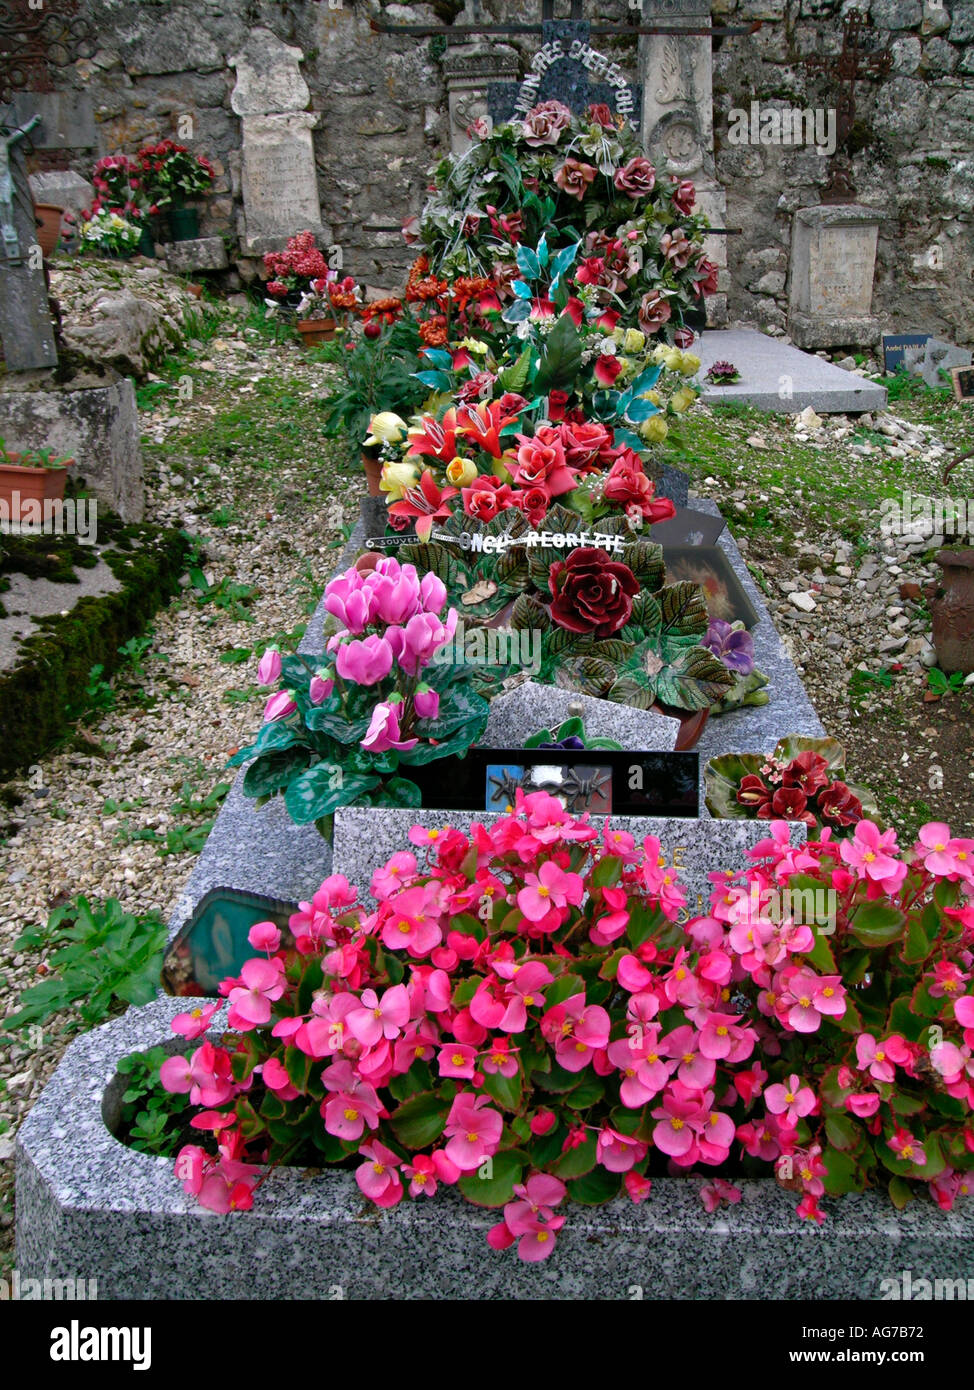 real and artificial flowers as grave decoration Stock Photo - Alamy